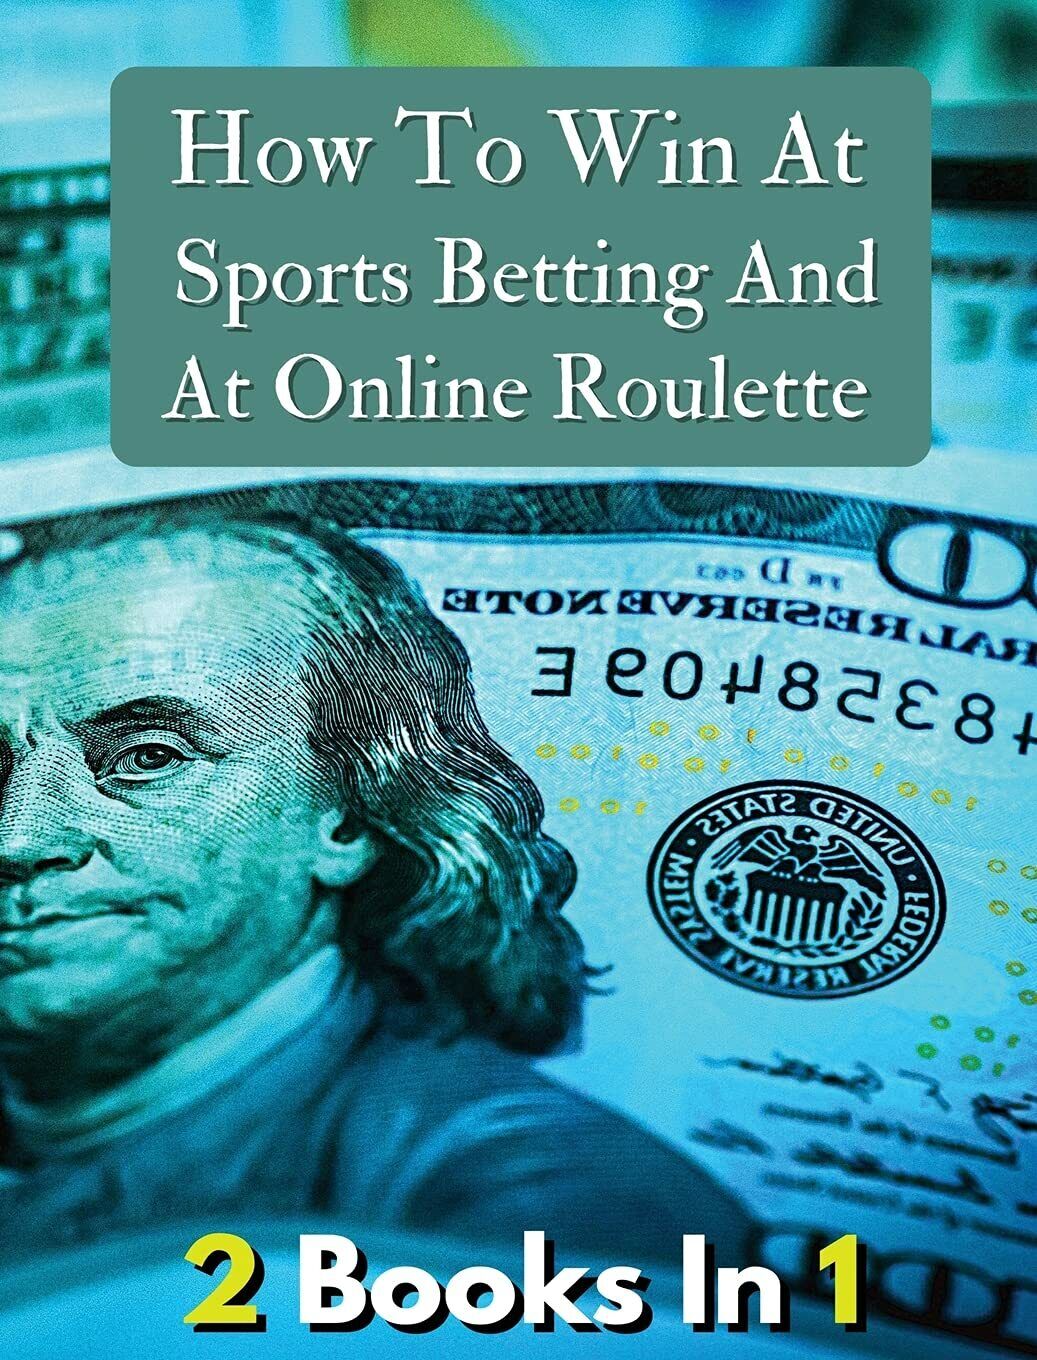 [ 2 Books in 1 ] - How to Win at Sports Betting and at Online Roulette - 2021